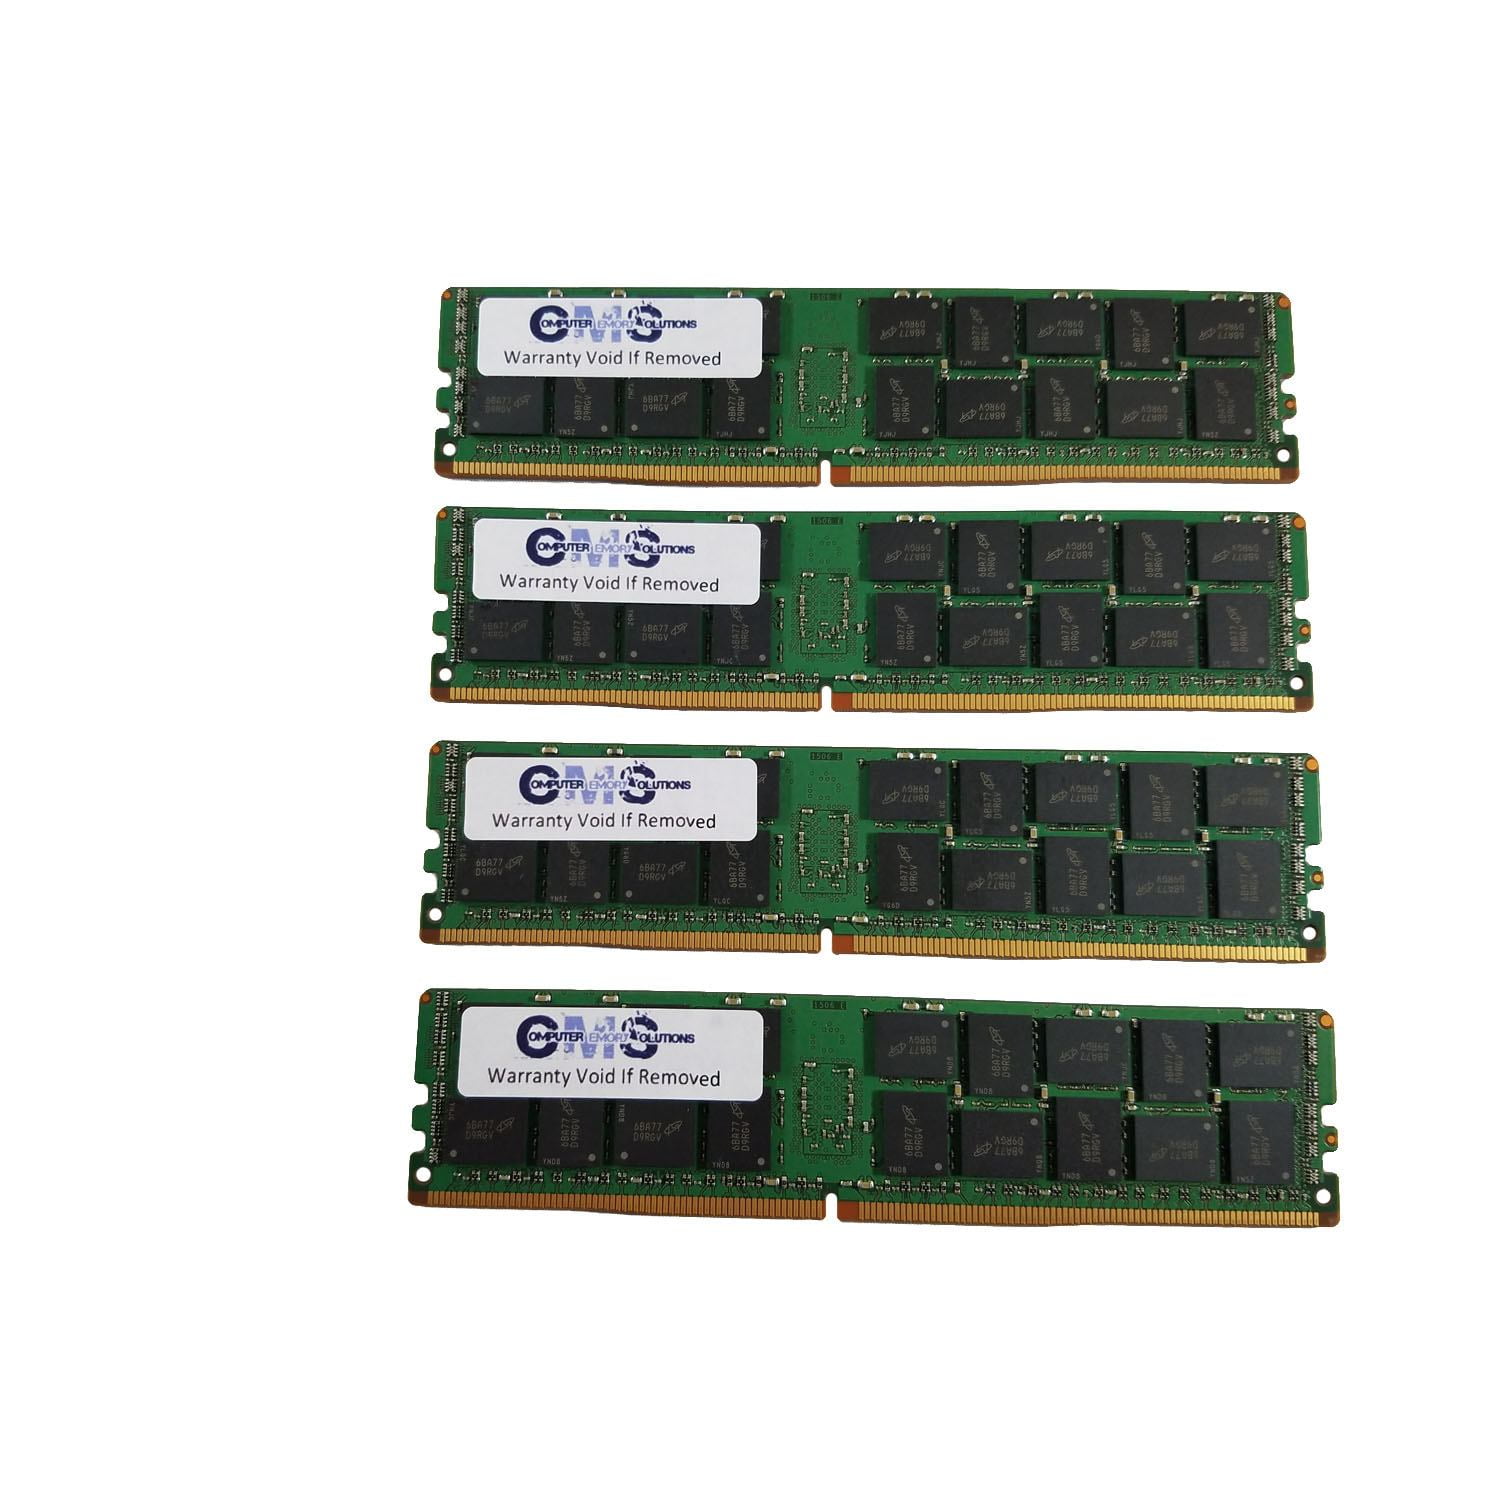 CMS 32GB (1X32GB) Memory Ram Compatible with Supermicro SuperWorkstation  5039C-T (Super X11SCA), X11SCA, X11SCA-F, X11SCA-W Motherboard - C142